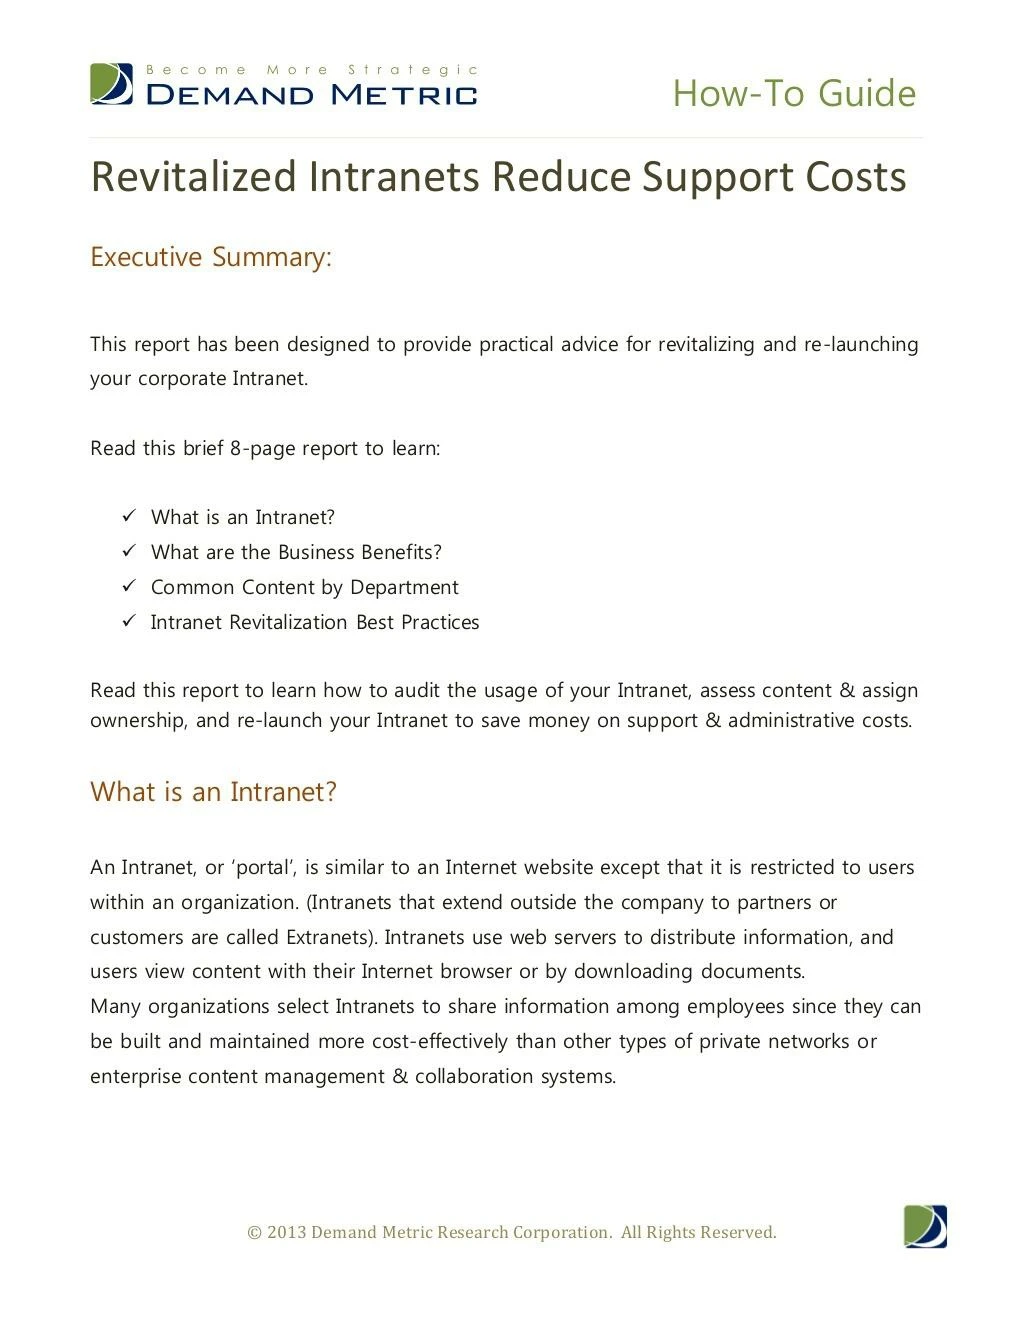 revitalizing intranets reduces support costs